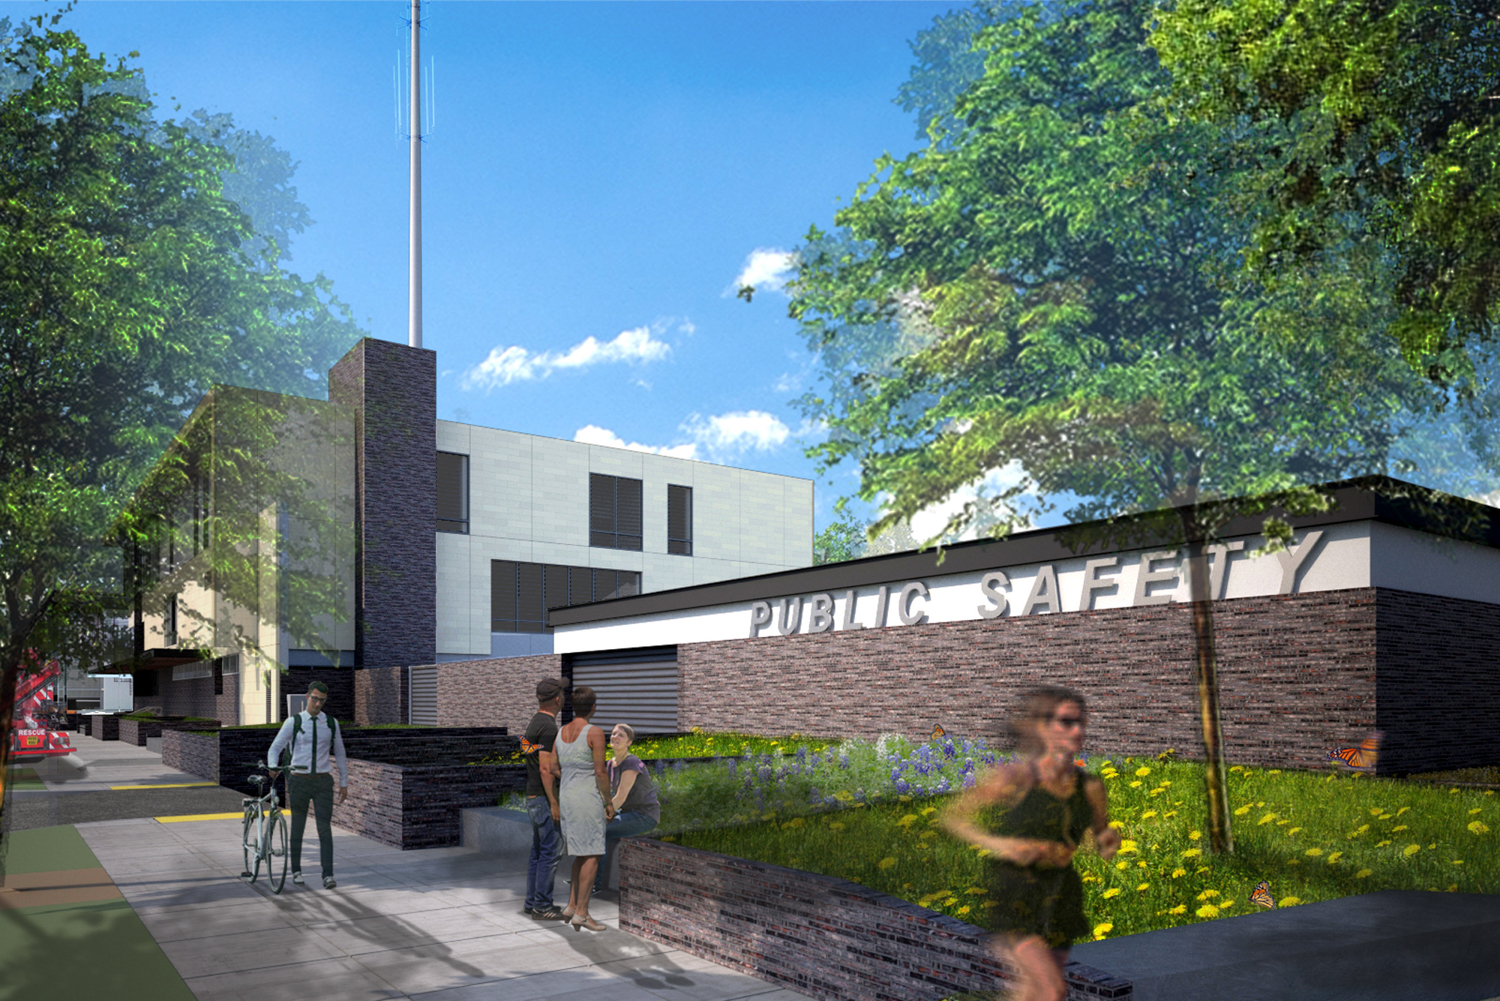 Palo Alto Public Safety Building exterior landscaped area, rendering by Ross Drulis Cusenbery Architecture